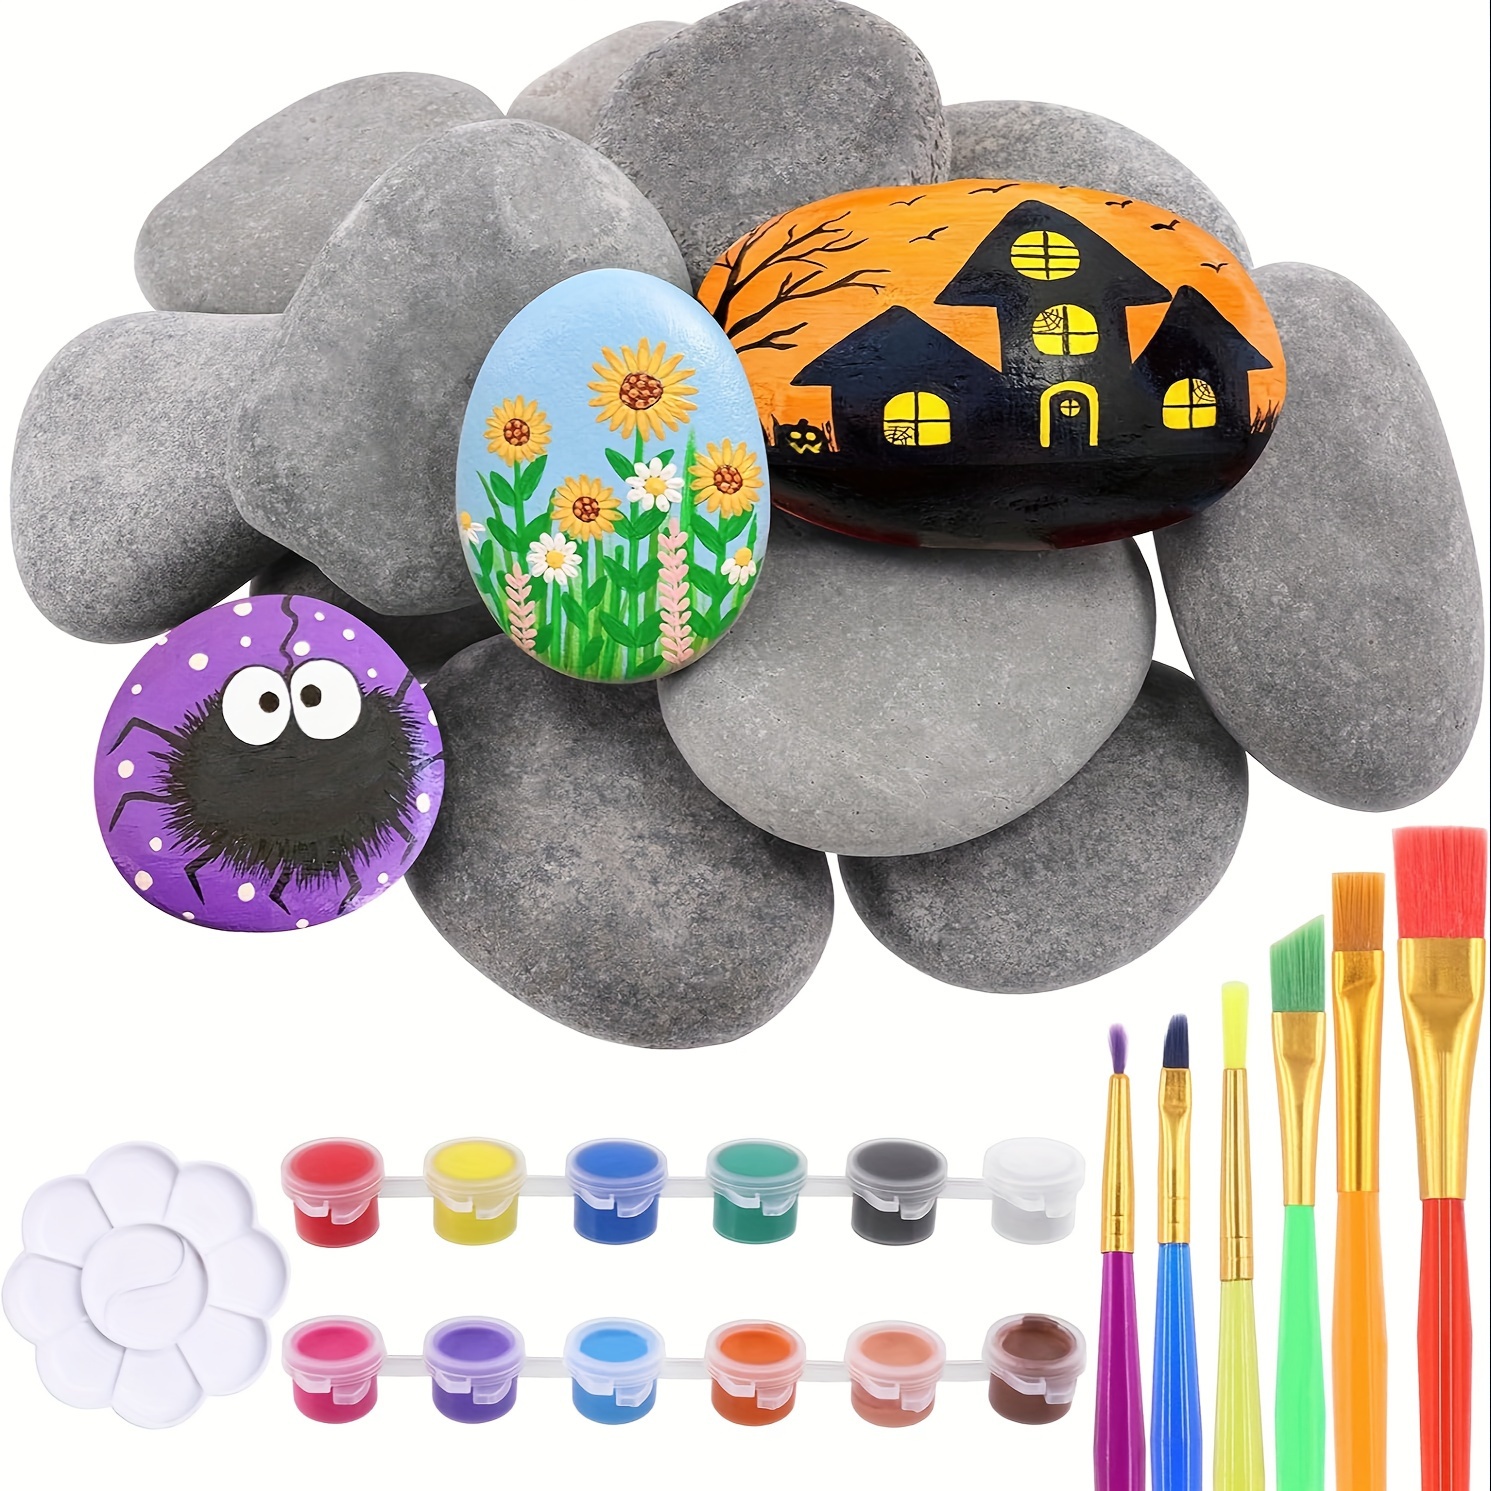 River Rocks for Painting, 2-3 Inches DIY Flat Painting Stones to